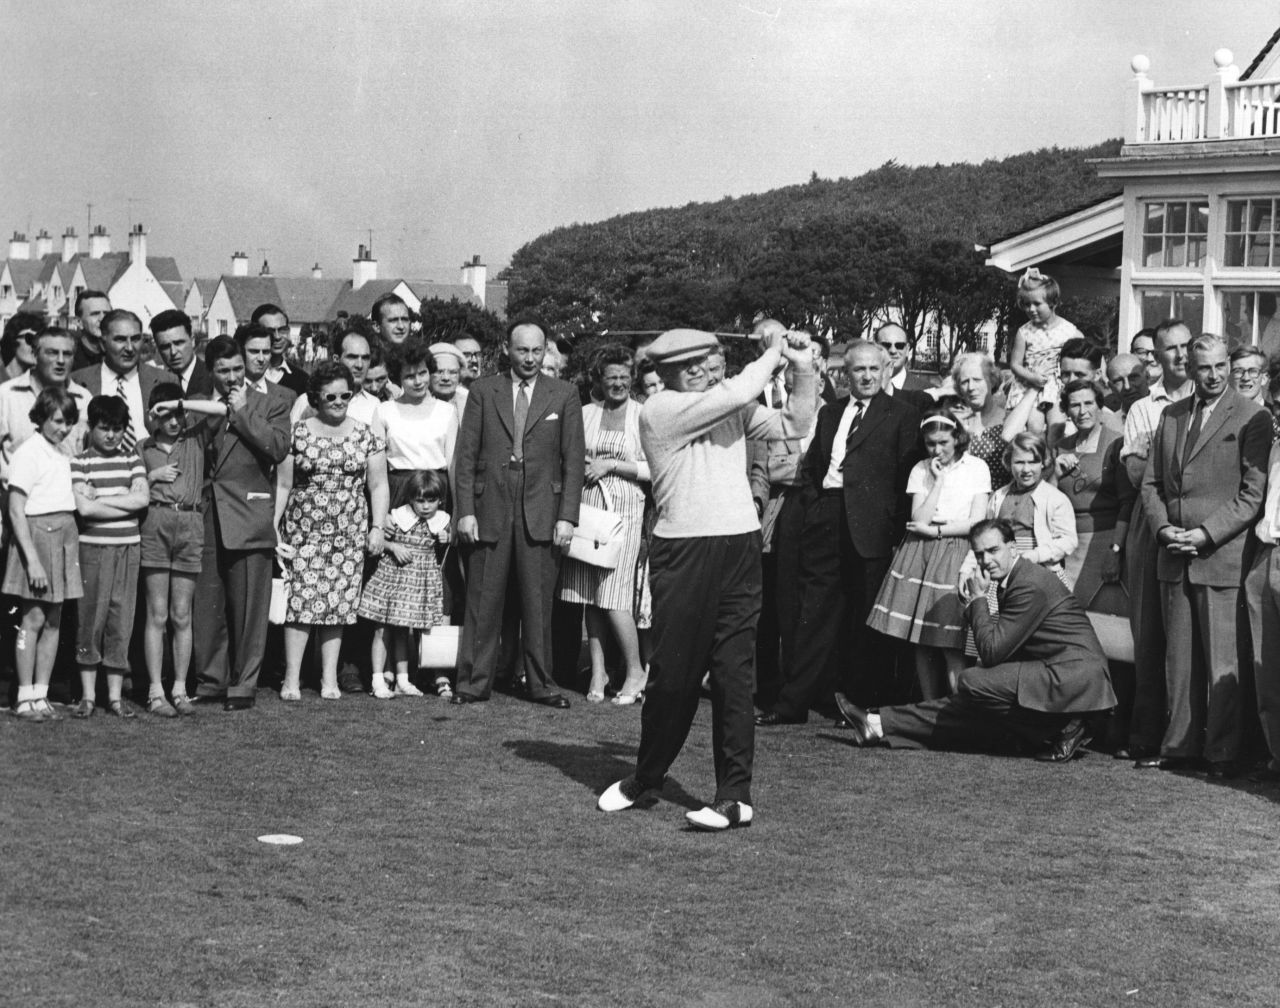 U.S. President Dwight D. Eisenhower drives down the fairway at Turnberry in Scotland in 1959. Eisenhower, a friend of Palmer's, was a golfing fanatic who <a href="http://www.whitehousemuseum.org/west-wing/oval-office-history.htm" target="_blank" target="_blank">destroyed the floor of the White House's Oval Office</a> with his golf spikes. 